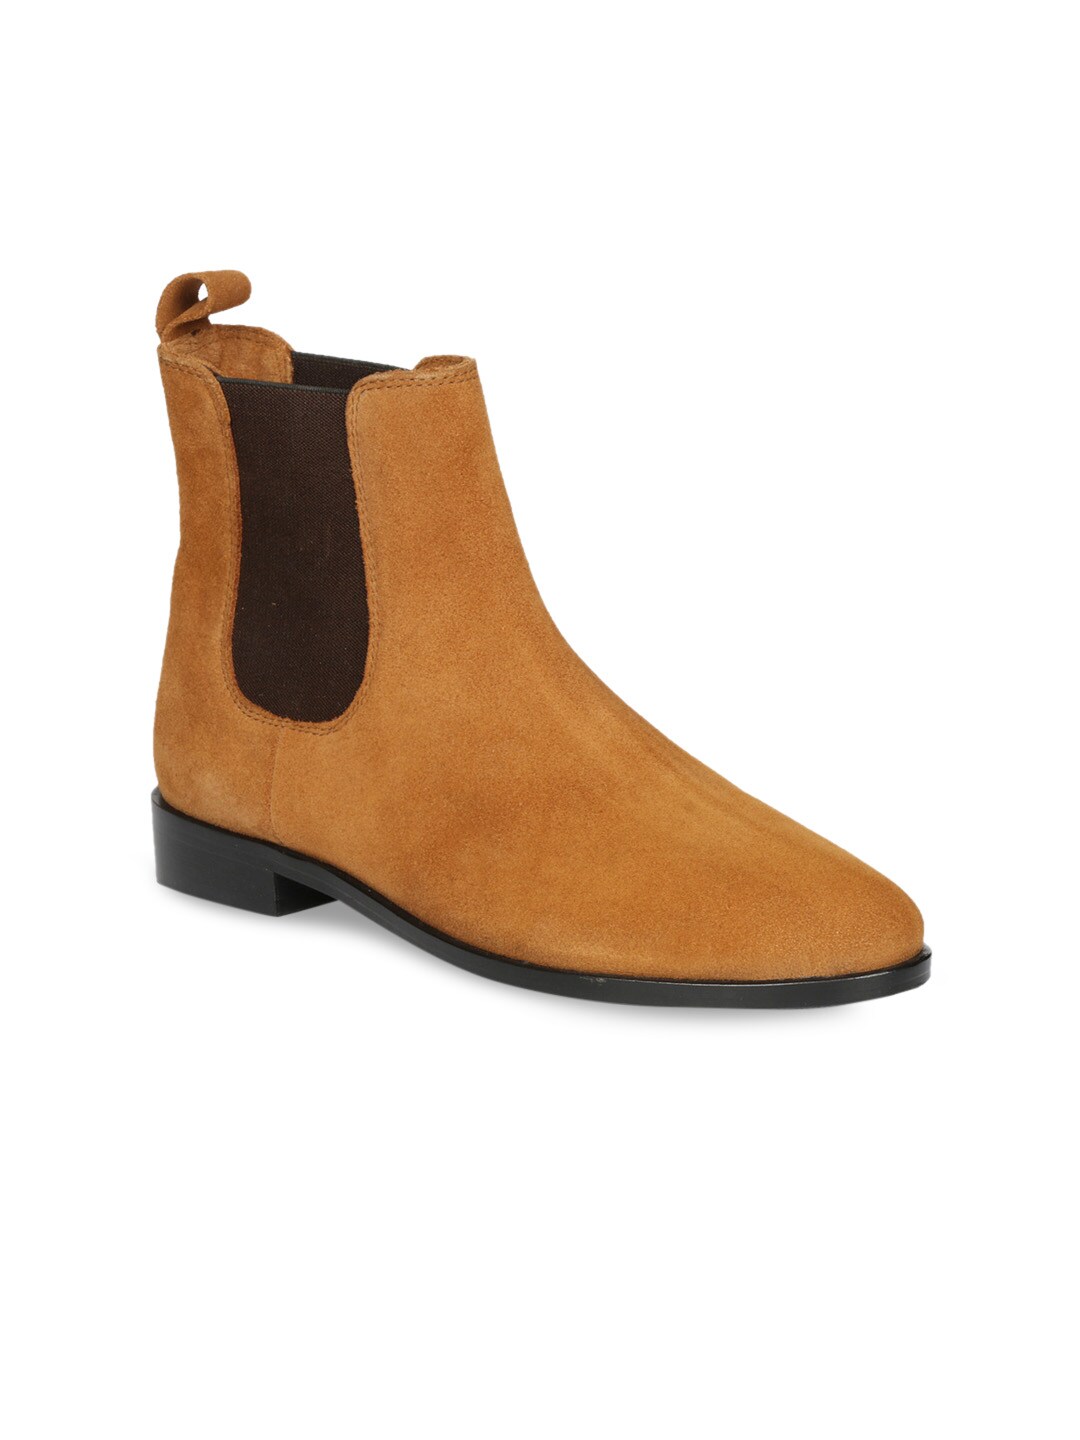 Saint G Tan Brown Leather Ankle Boot Price in India